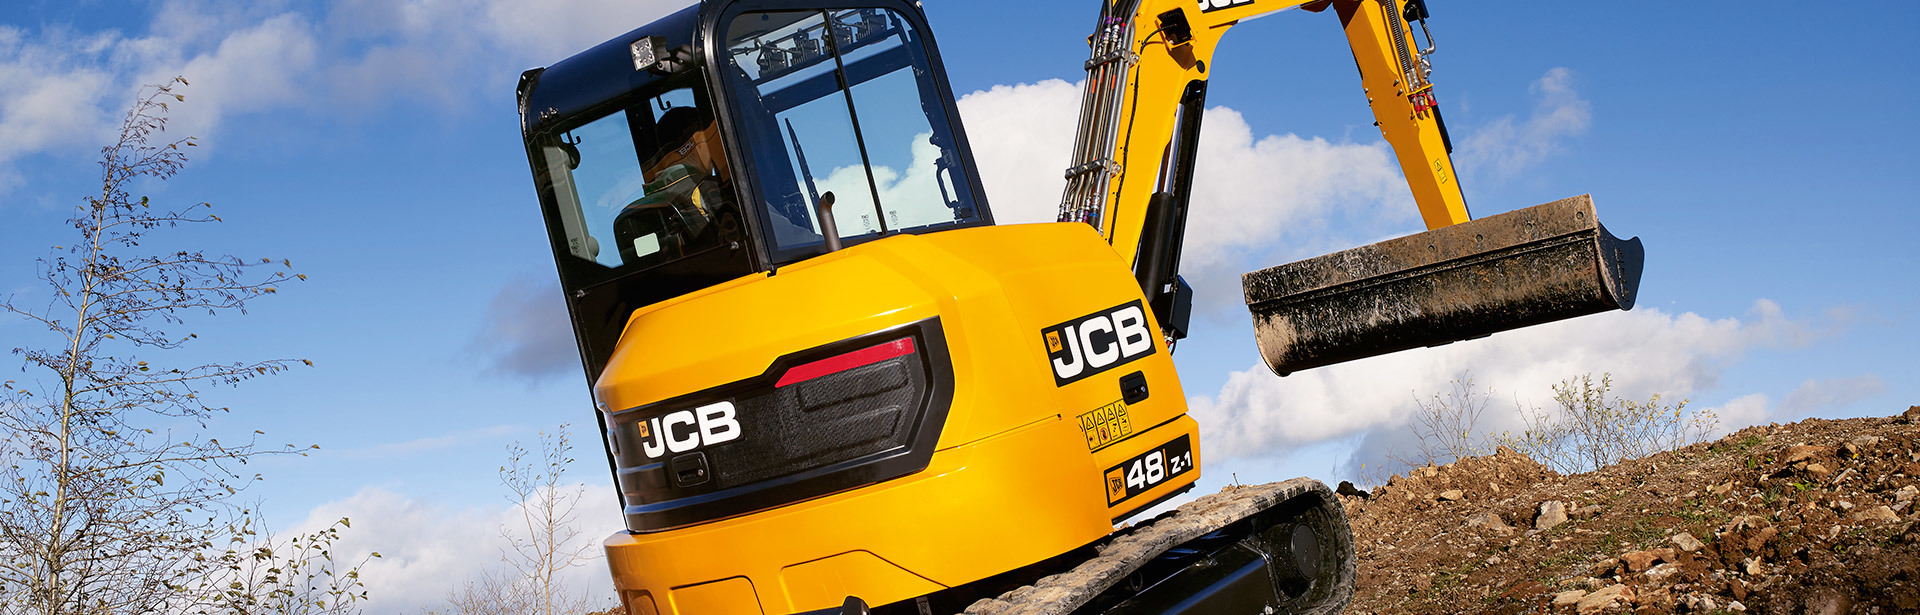 JCB 48Z-I Small Excavator for Sale, Compact Excavator, Mini Digger